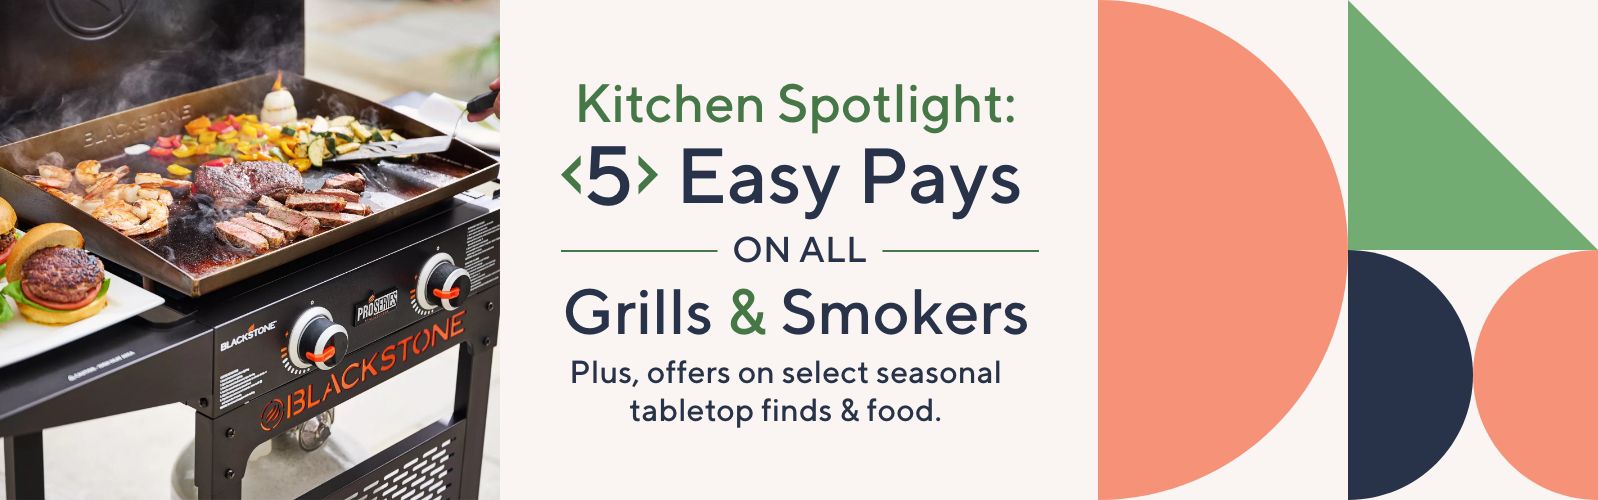 Kitchen Spotlight: 5 Easy Pays on All Grills & Smokers Plus, offers on select seasonal tabletop finds & food. 